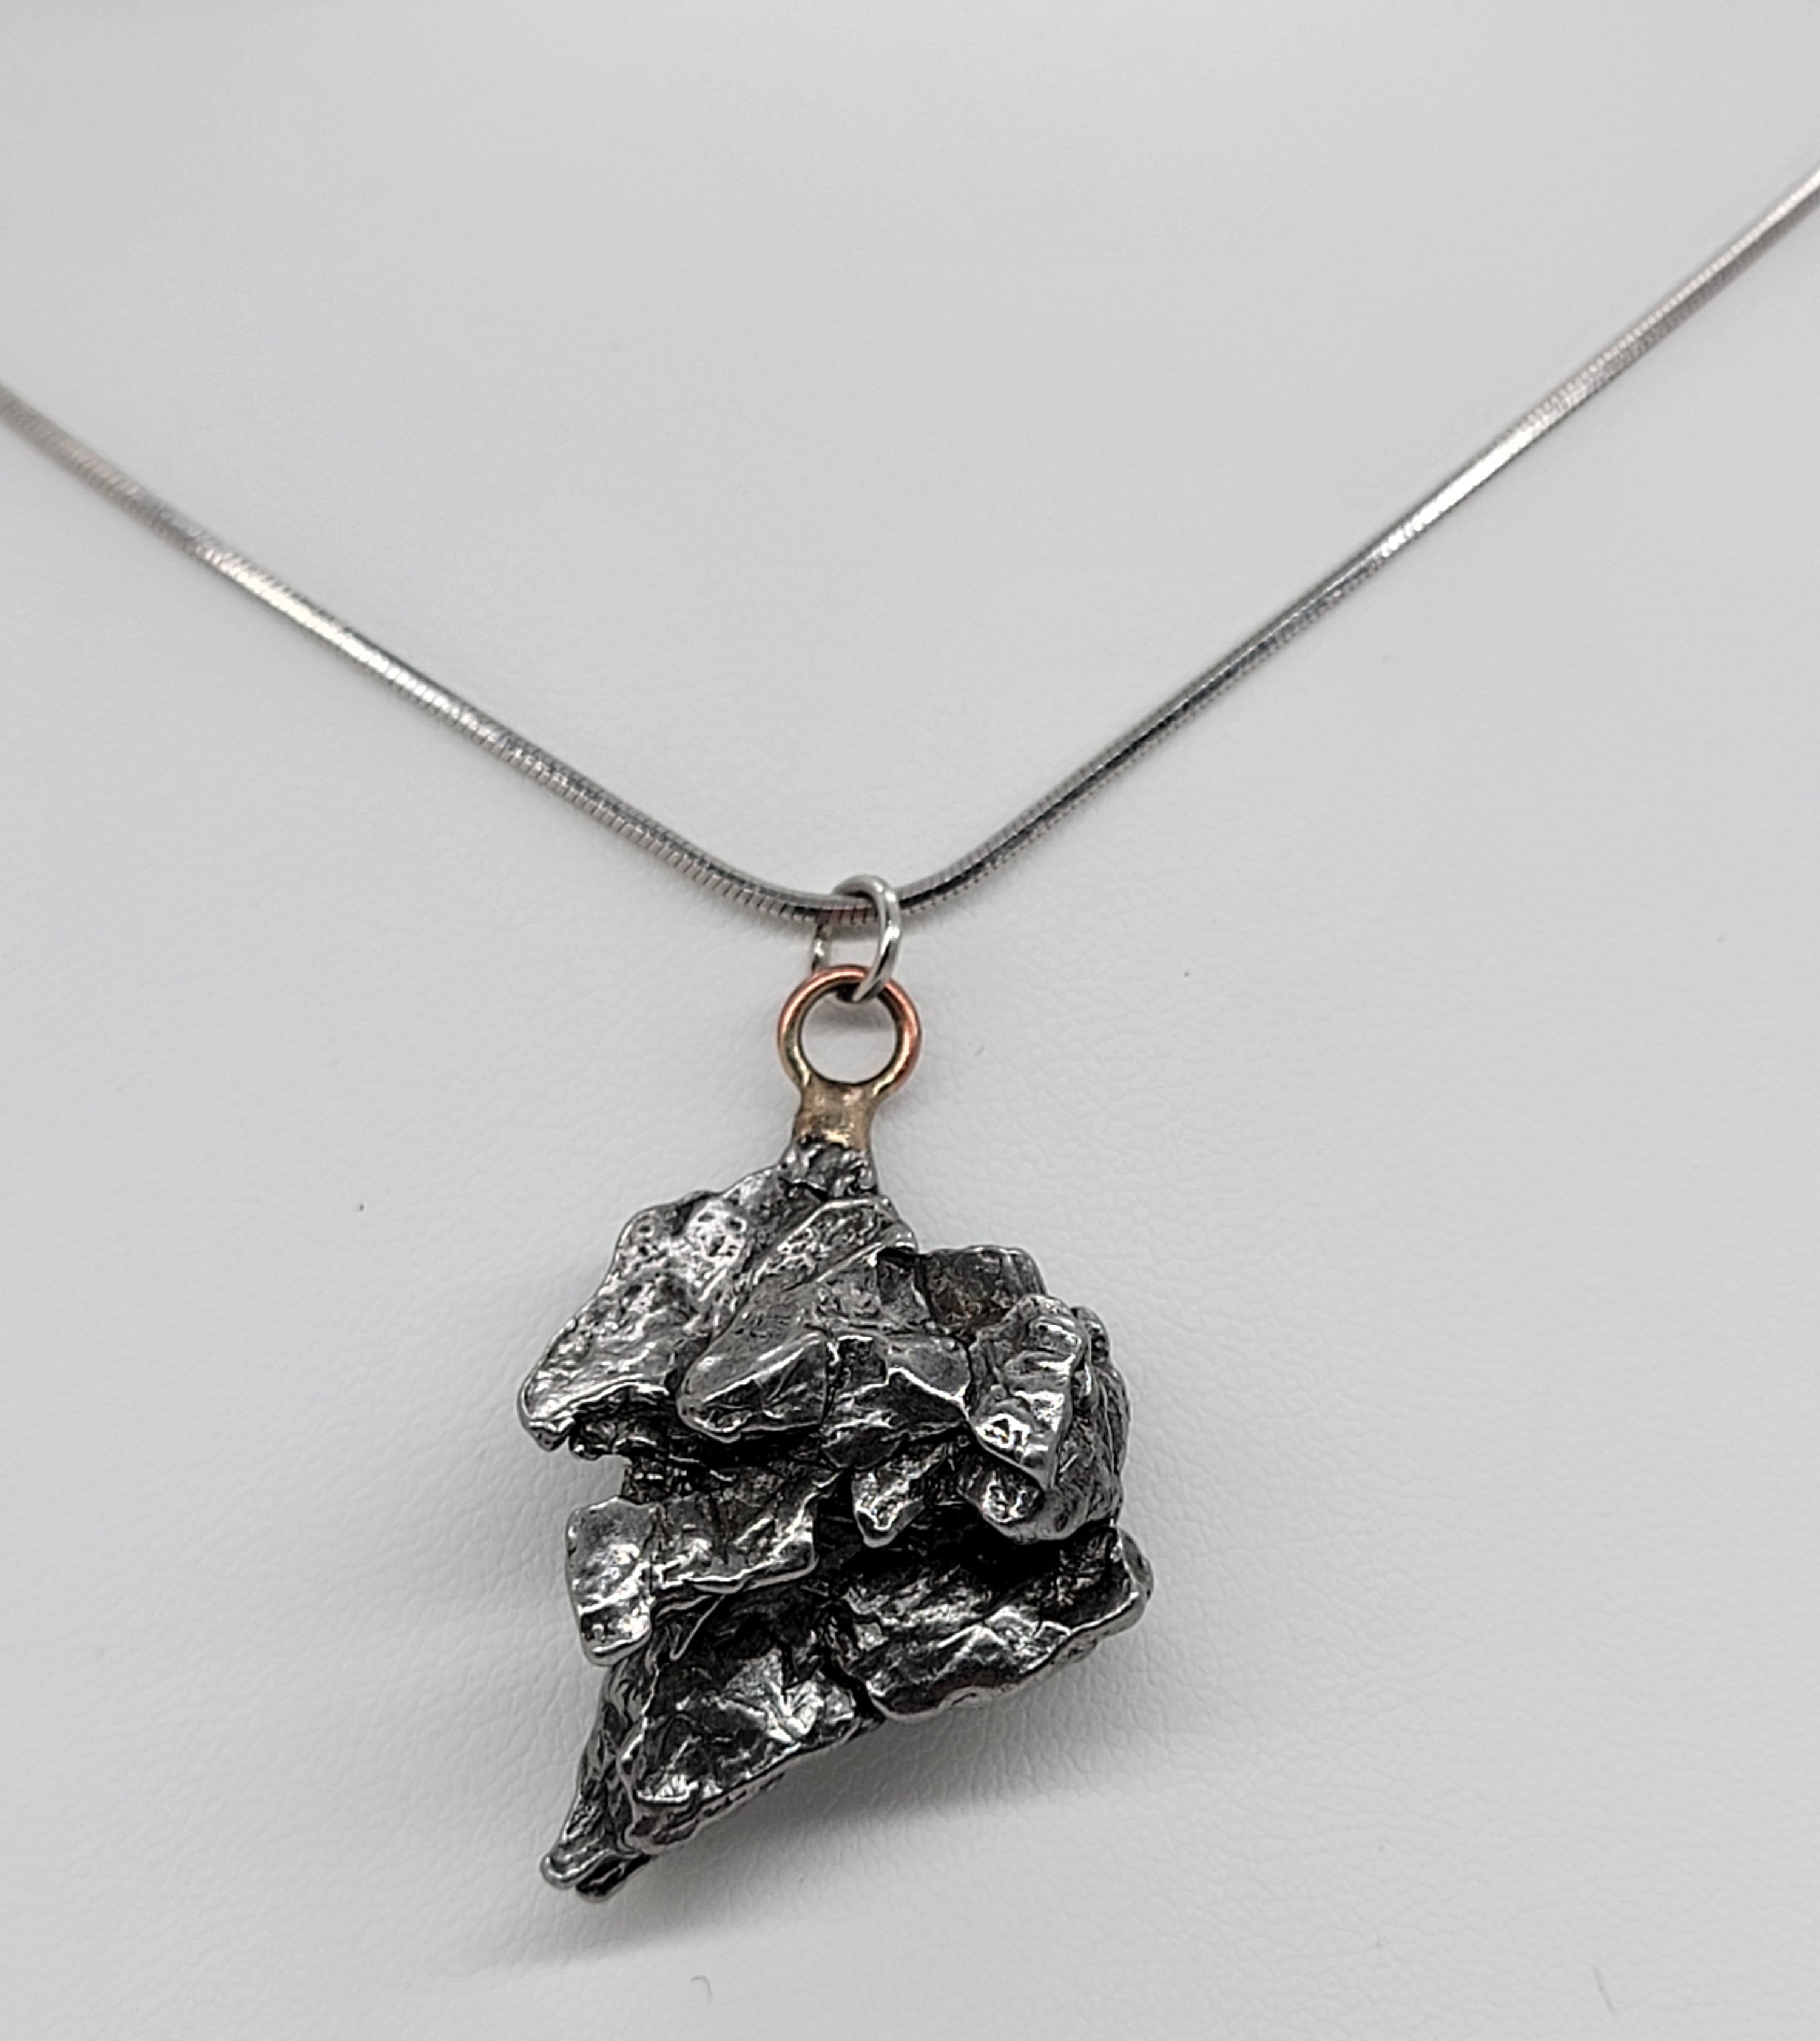 I Love You to the Moon and Back Meteorite Pendant